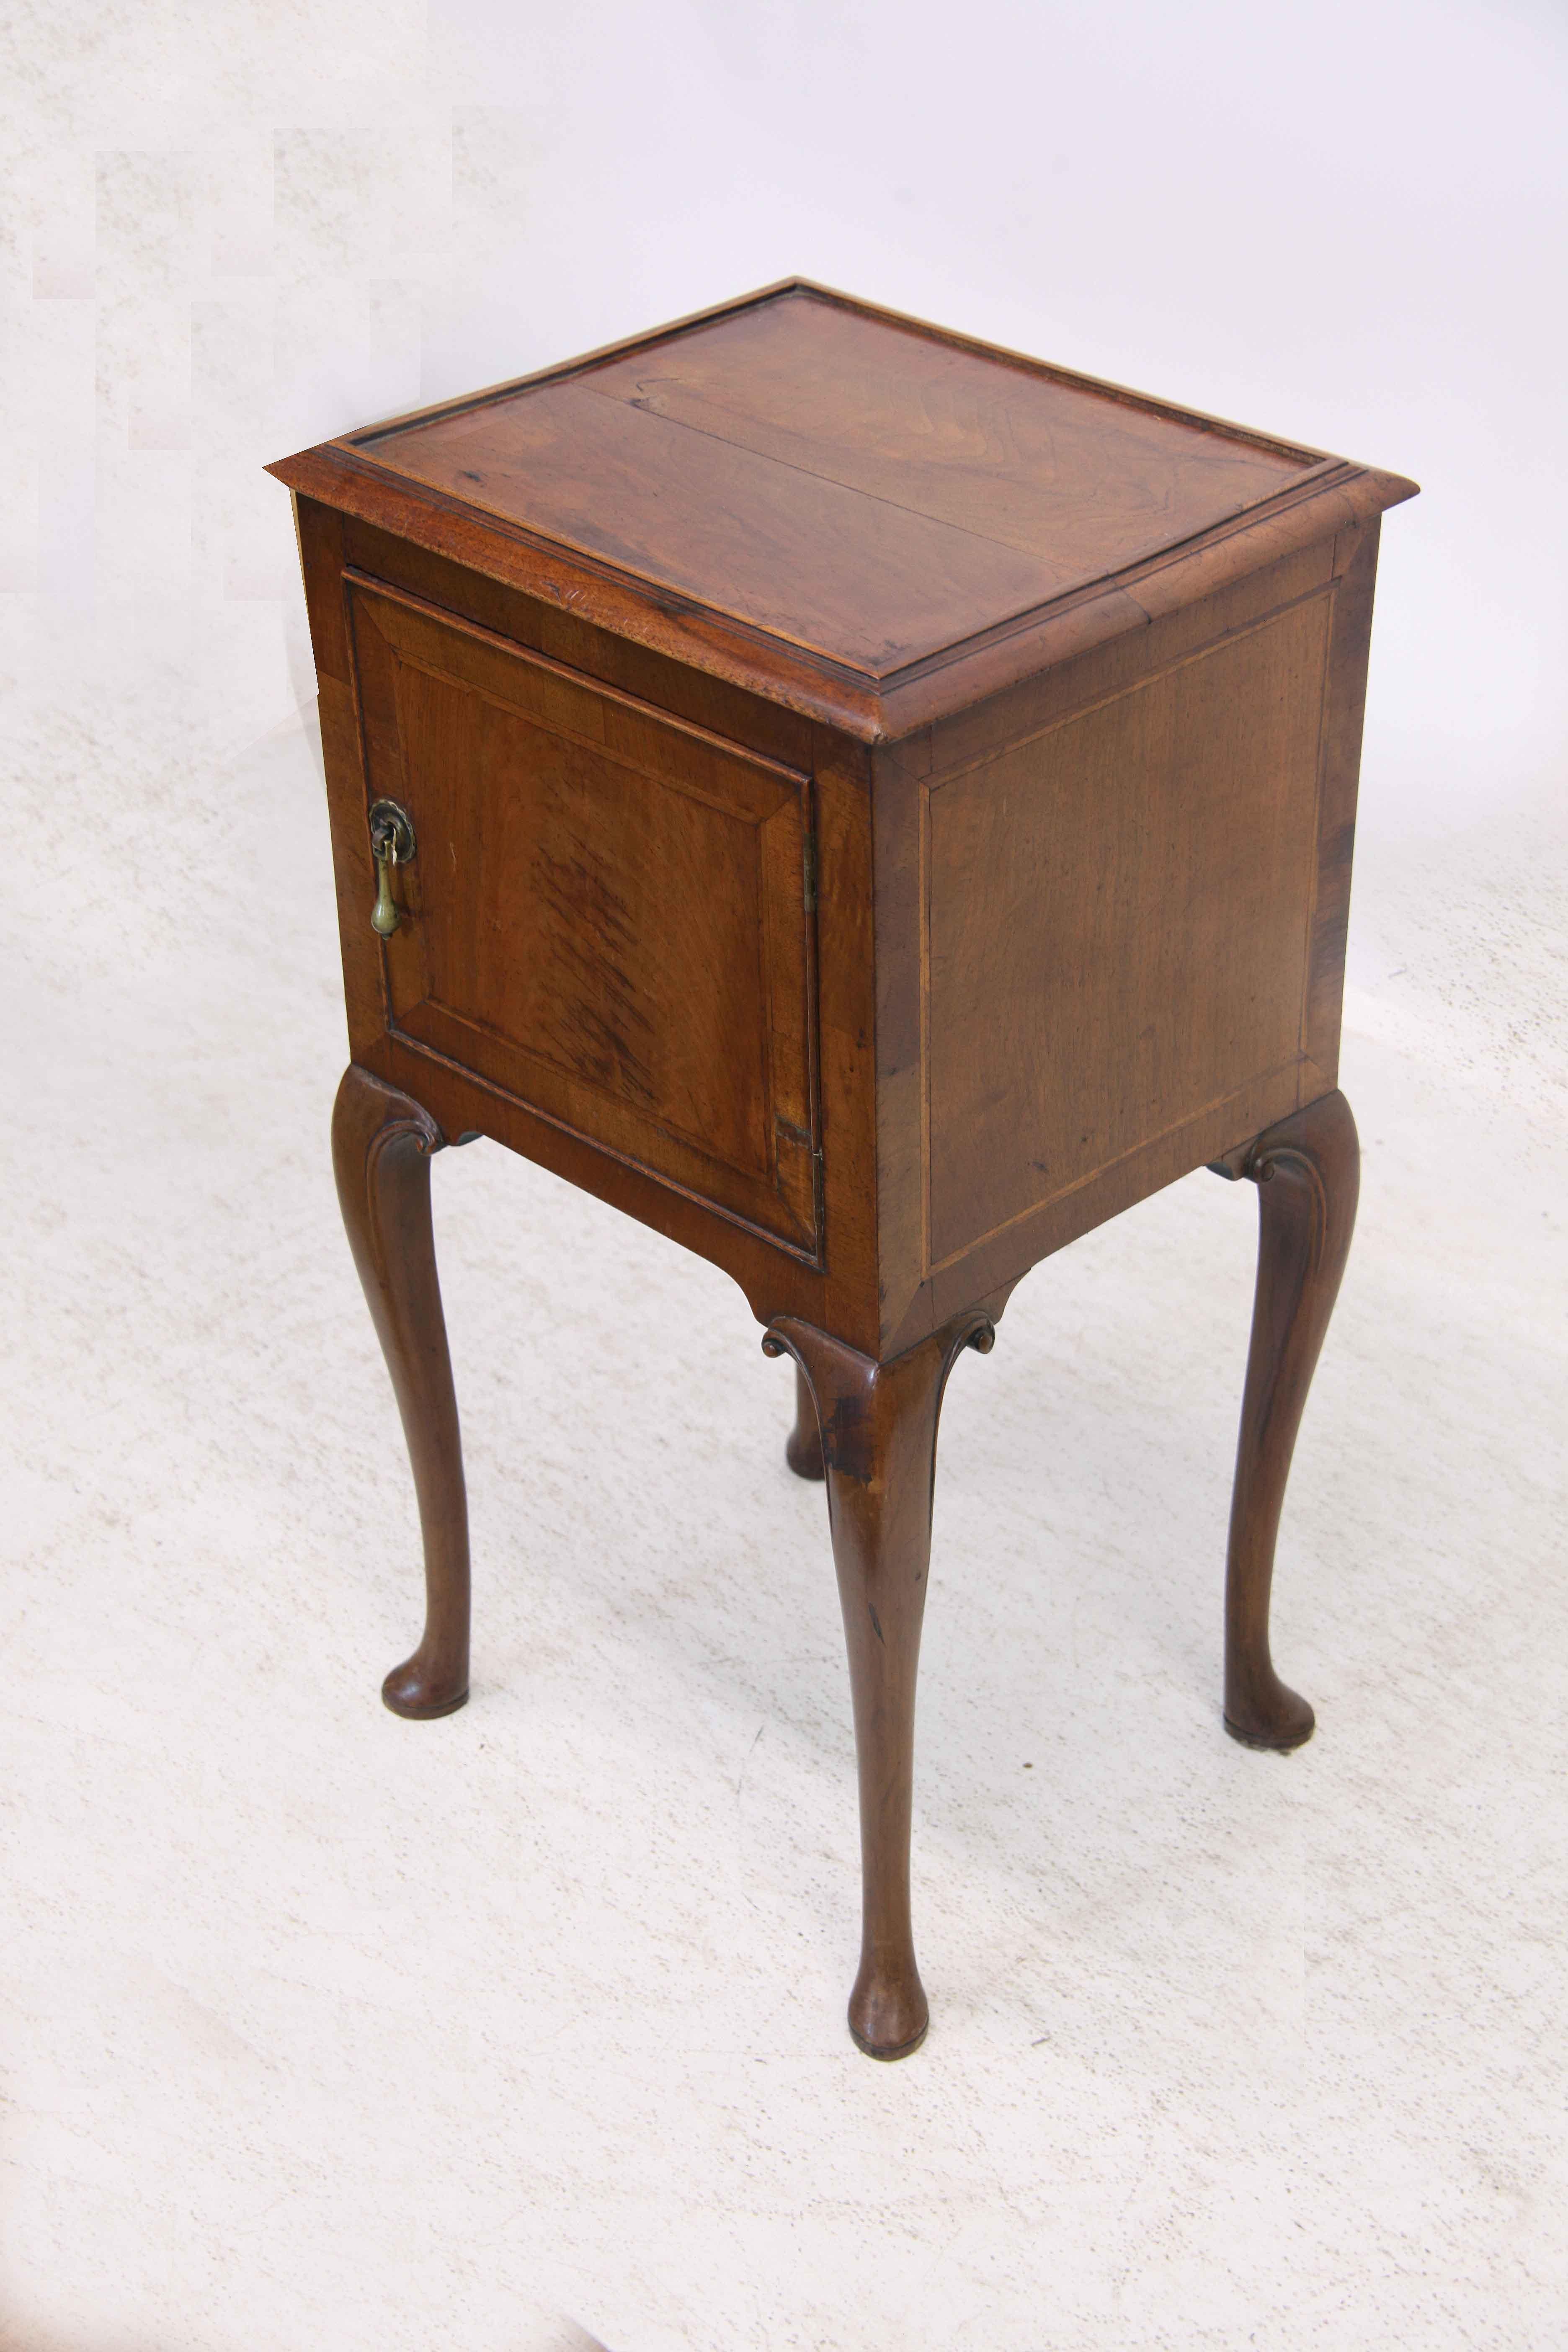 Walnut Queen Anne style side table, the top with molded edge, the door with beautiful walnut veneer and inlaid with a ''herring bone'' style inlay and cross banding around the perimeter, original brass tear drop pull. The sides are similarly inlaid